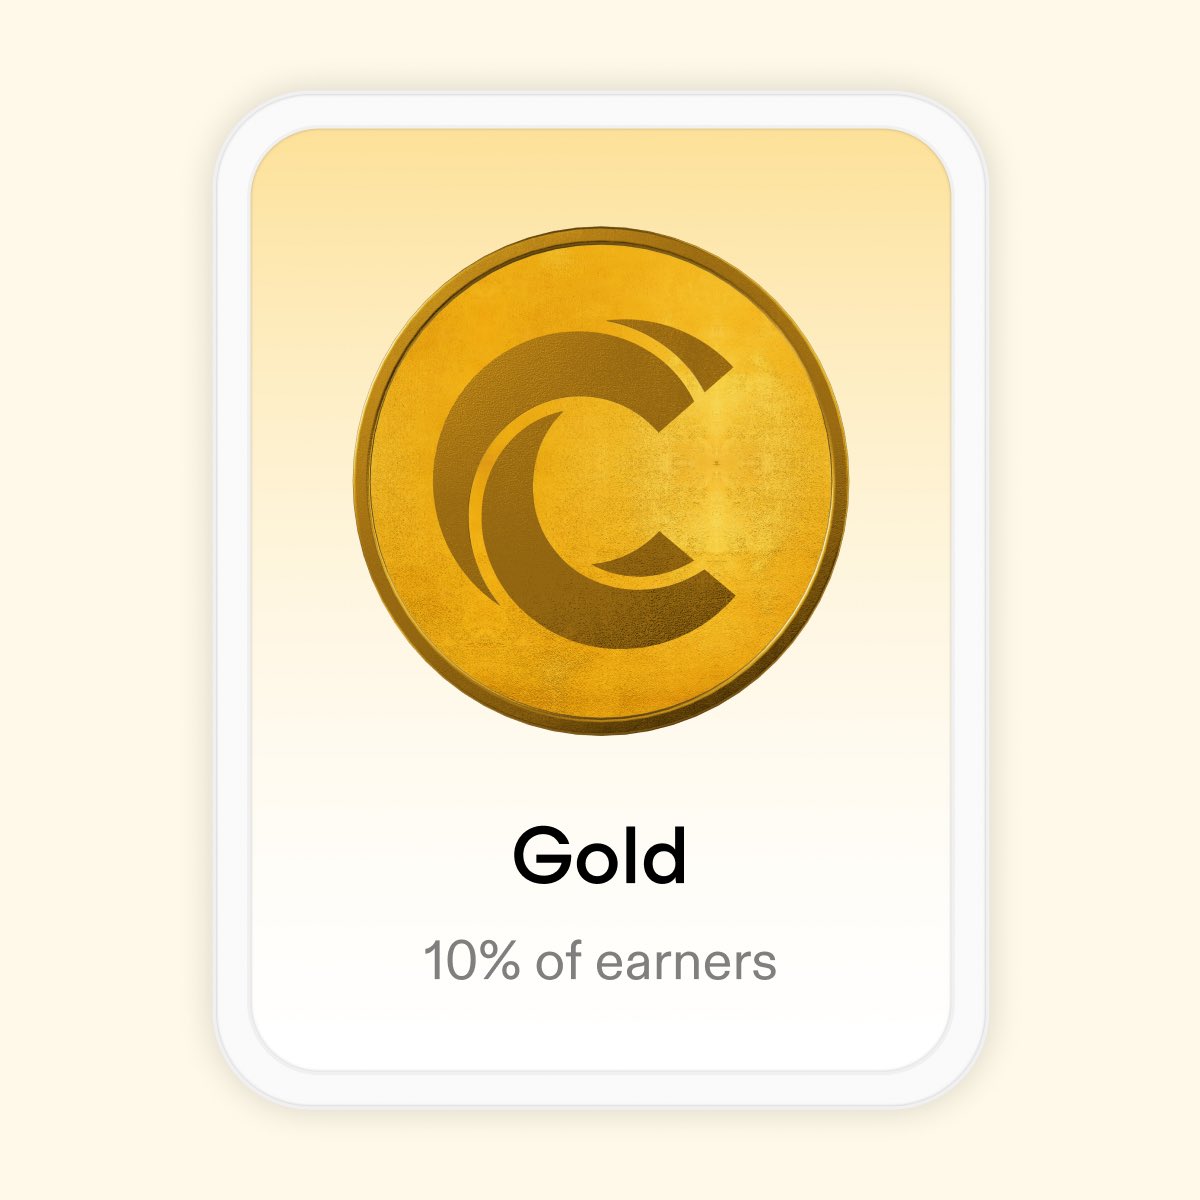 I’m in the Gold tier with 2150 Karma on @CoinList #tierUP coinlist.co/karma